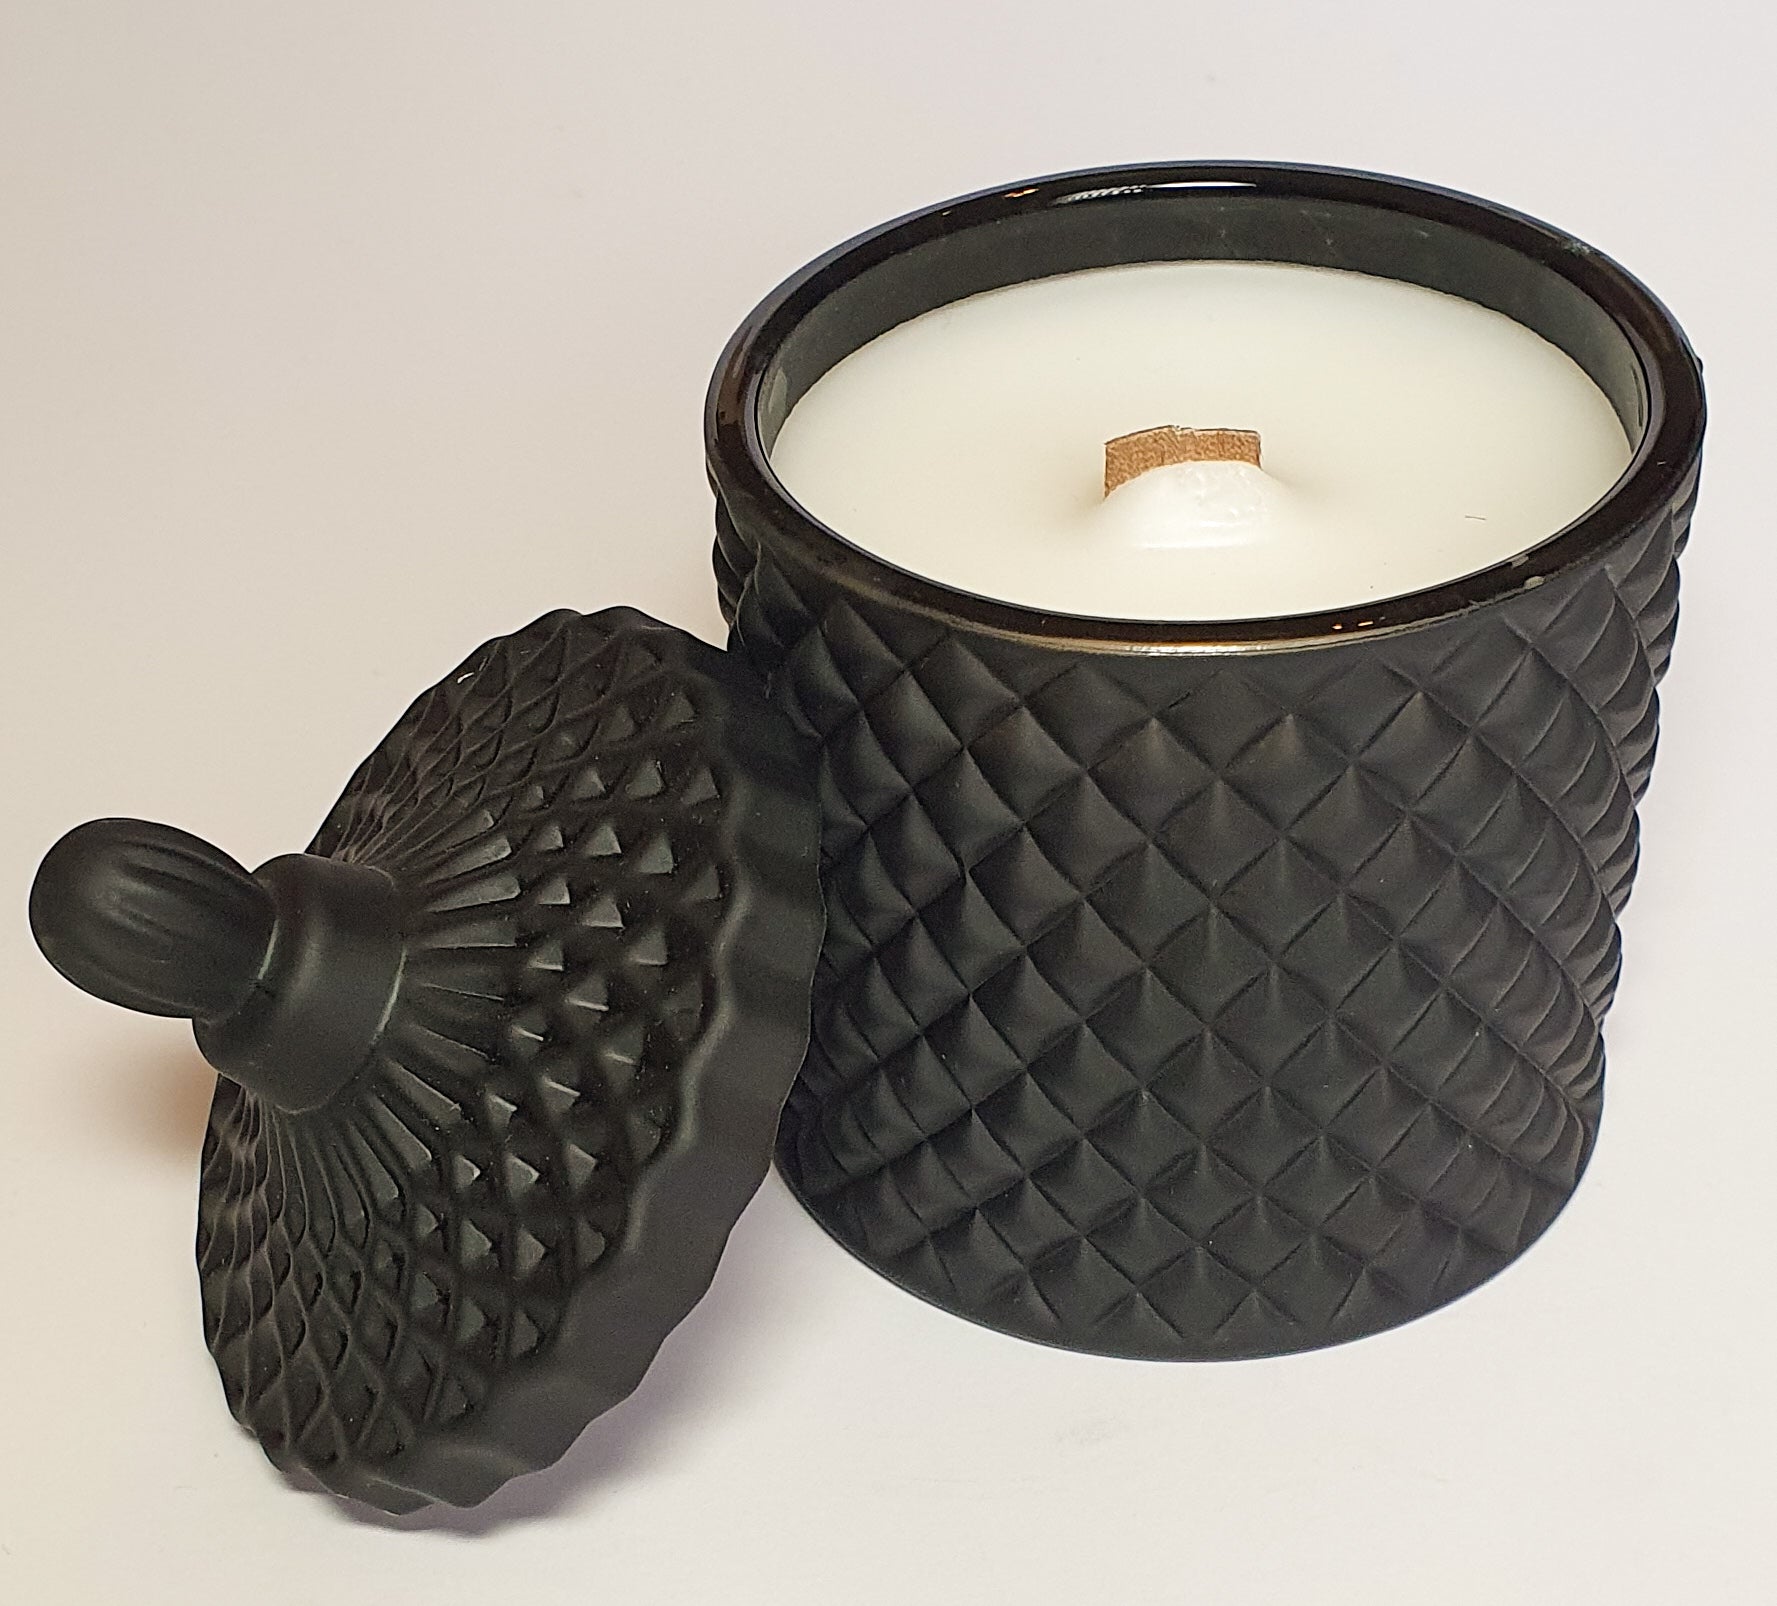 Country Gardens Candle